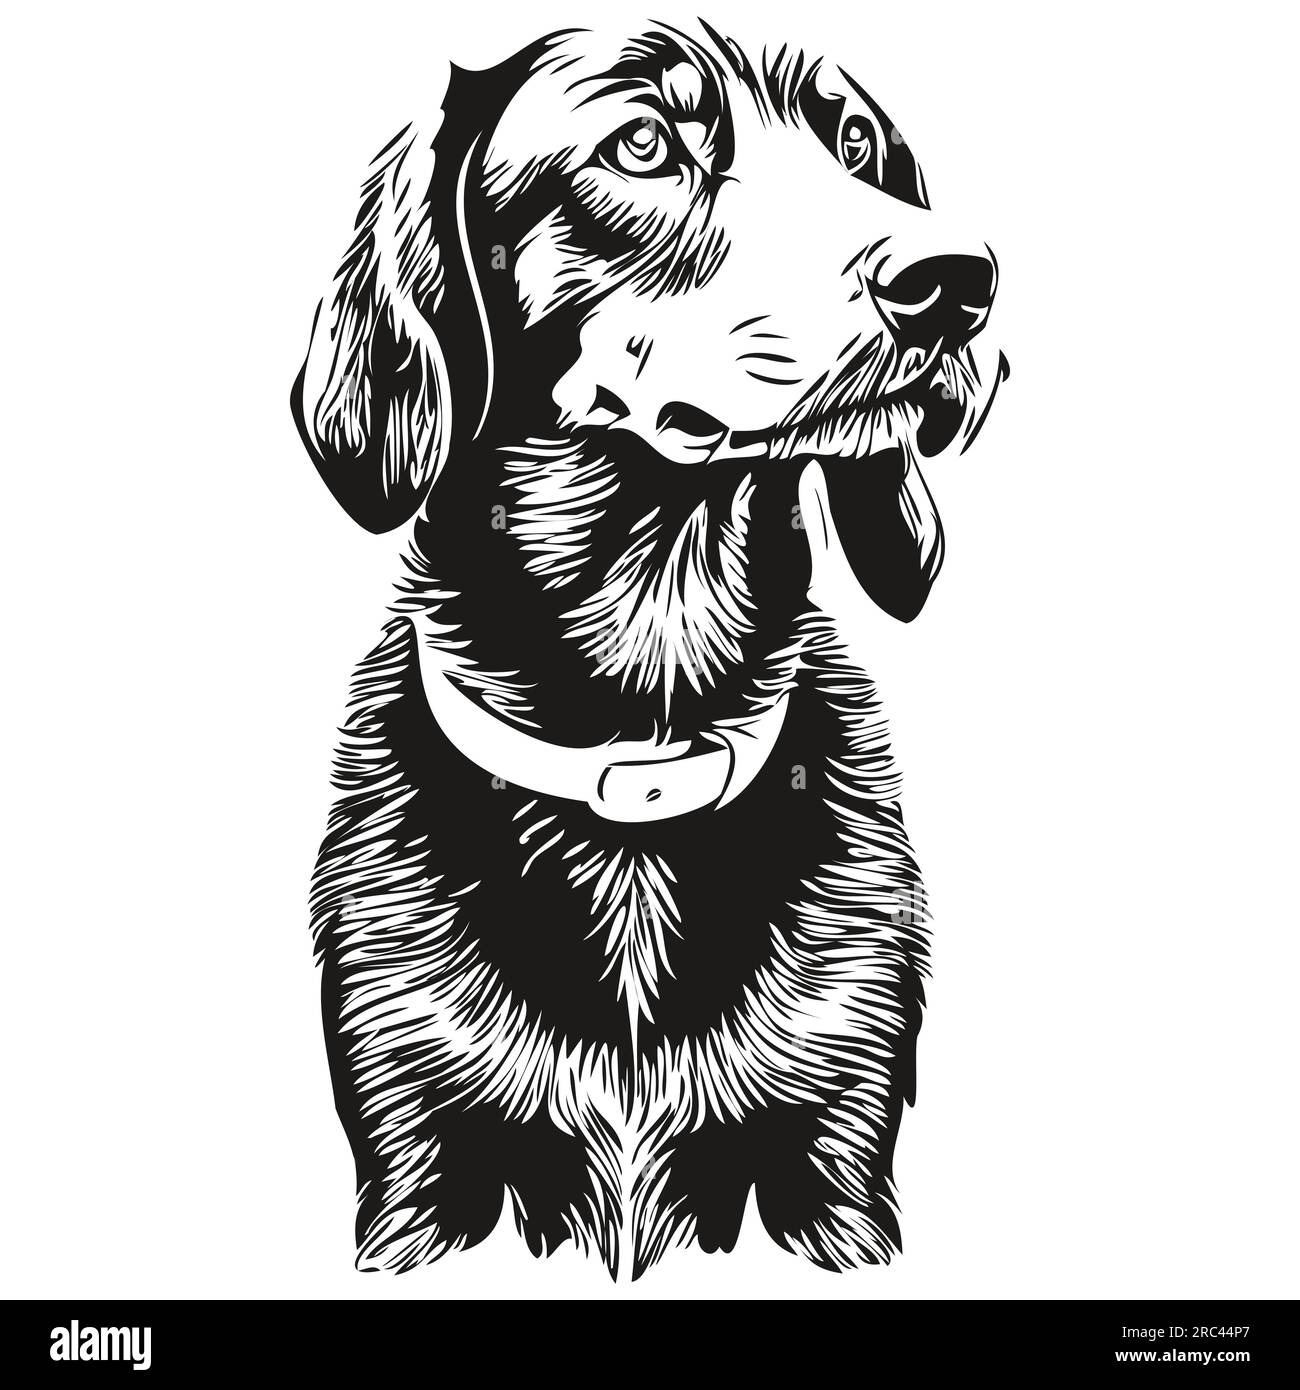 Black and Tan Coonhound dog pet sketch illustration, black and white engraving vector Stock Vector